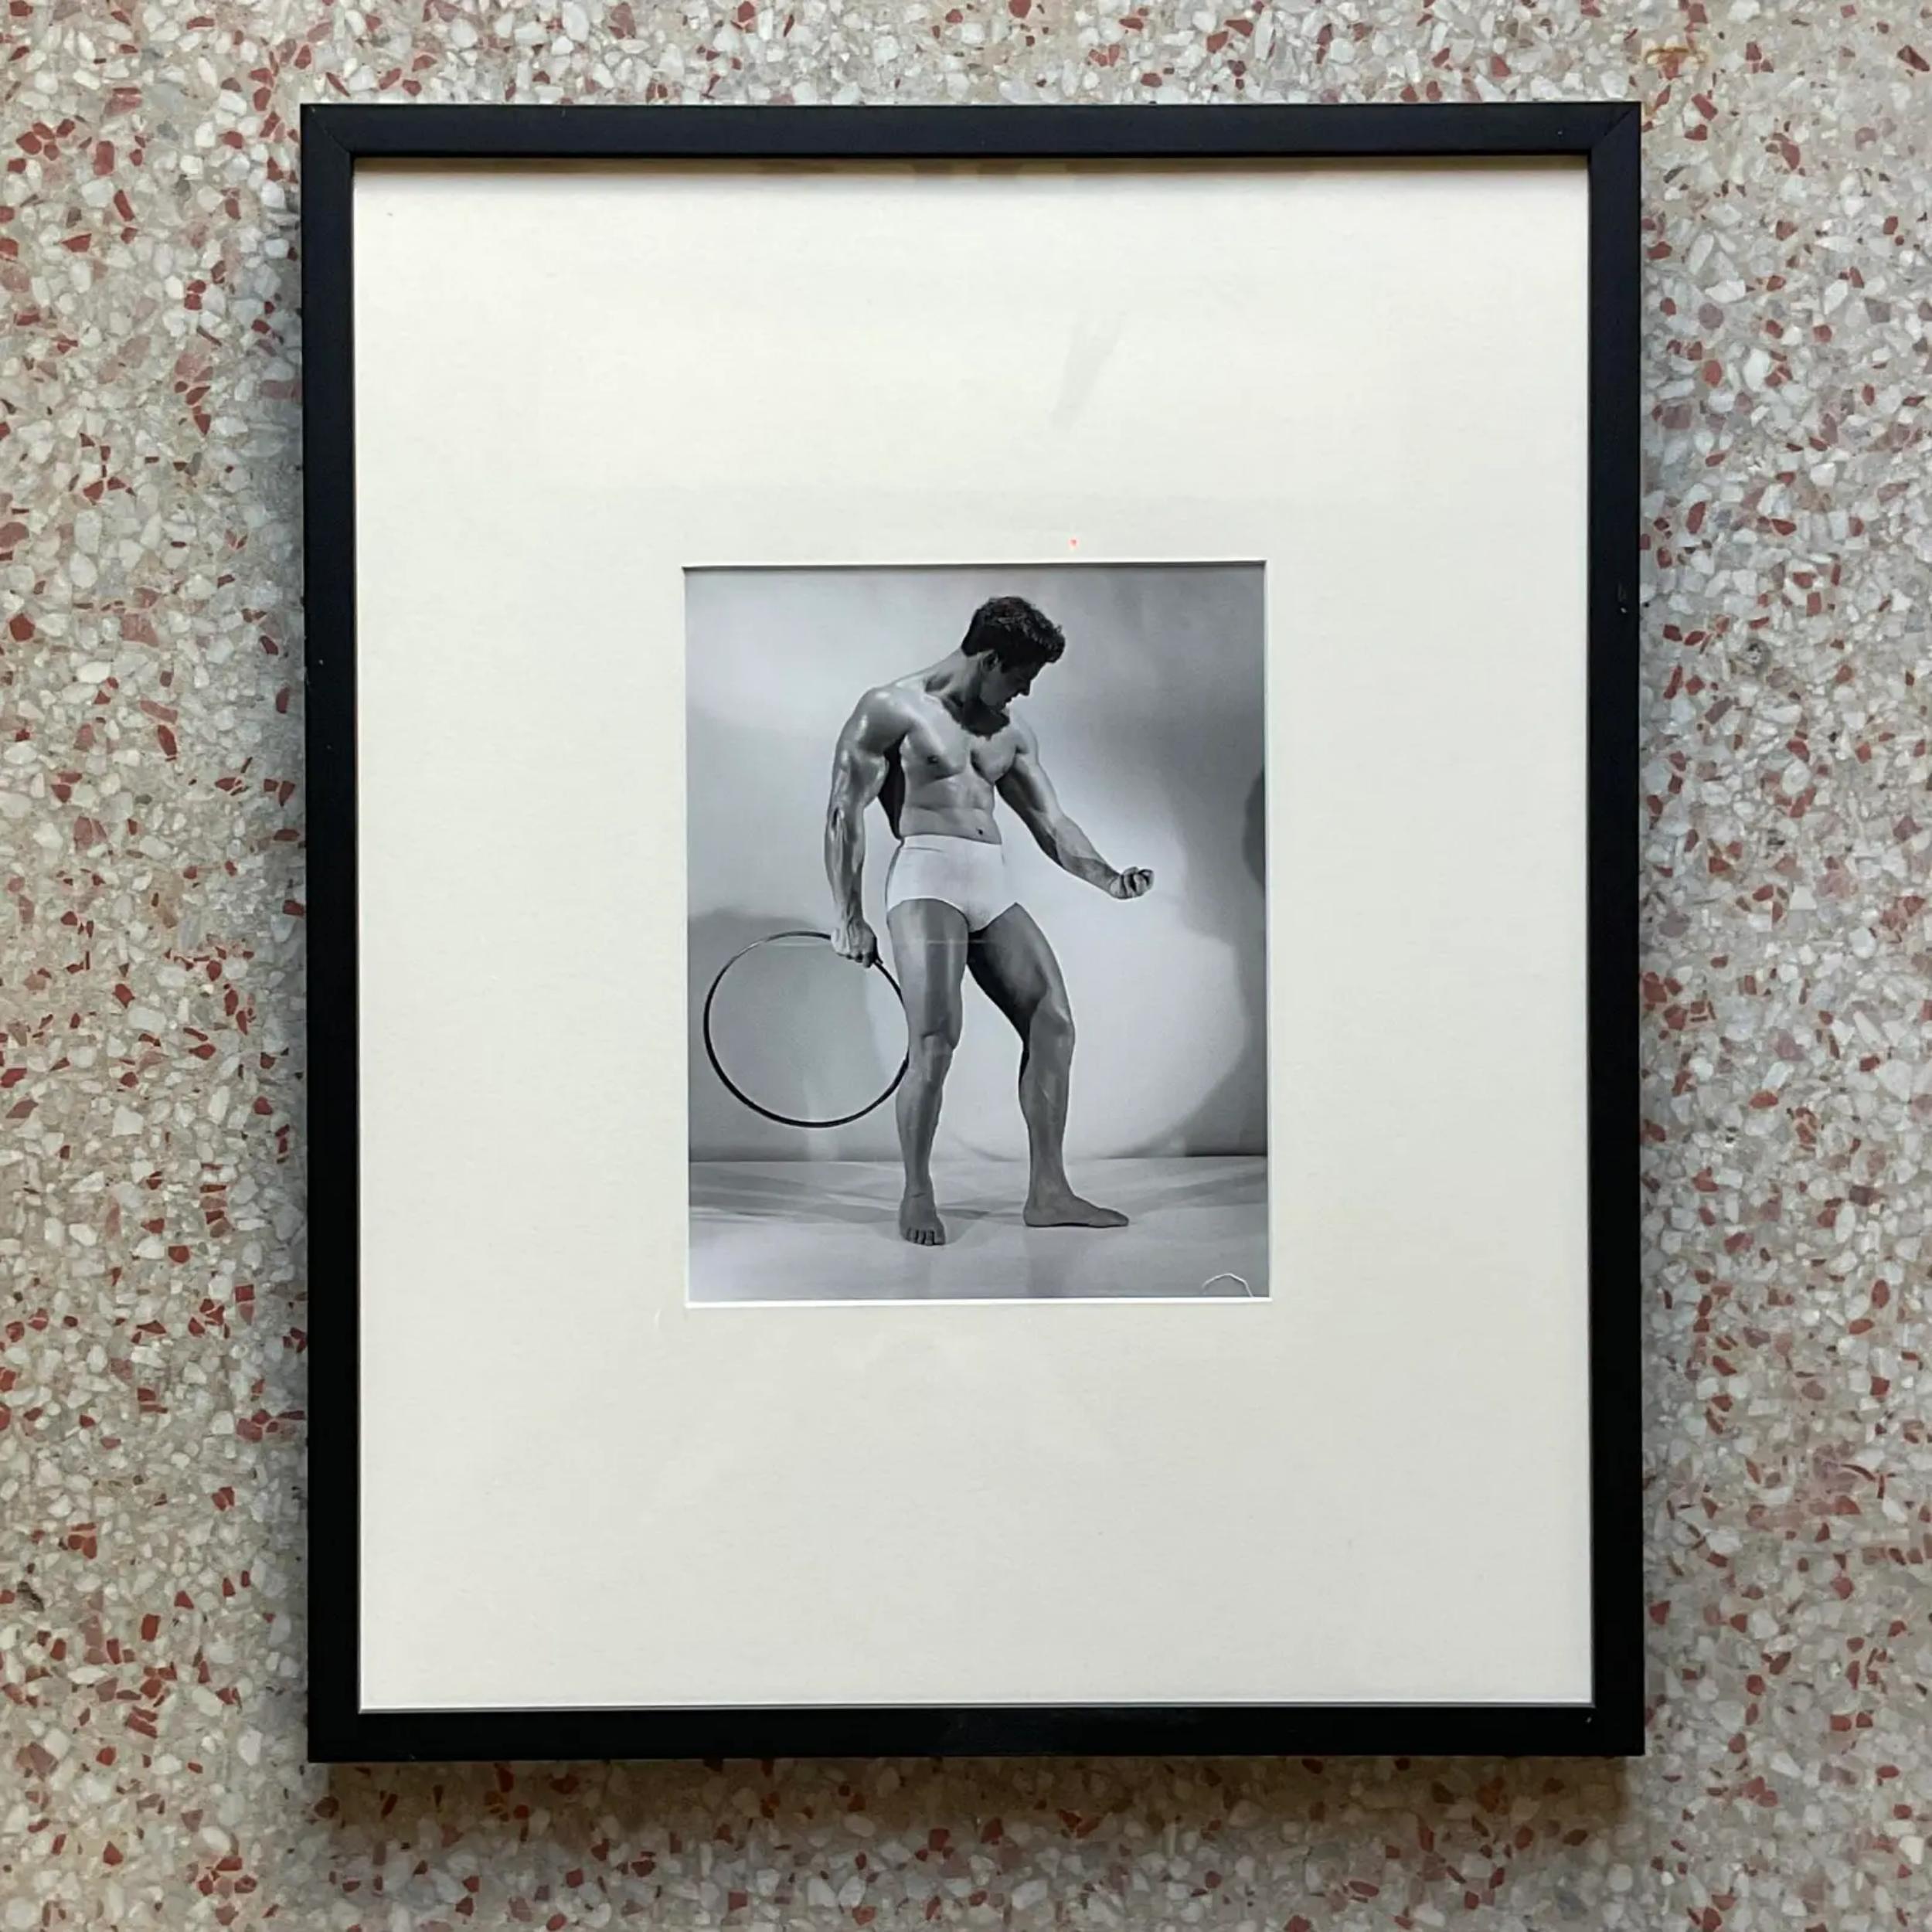 A fabulous Vintage MCM Framed Photograph of Athletic Man With Hoop. Shot by thr infamour a Bruce of LA. Purchased from the estate auction of thr artist.